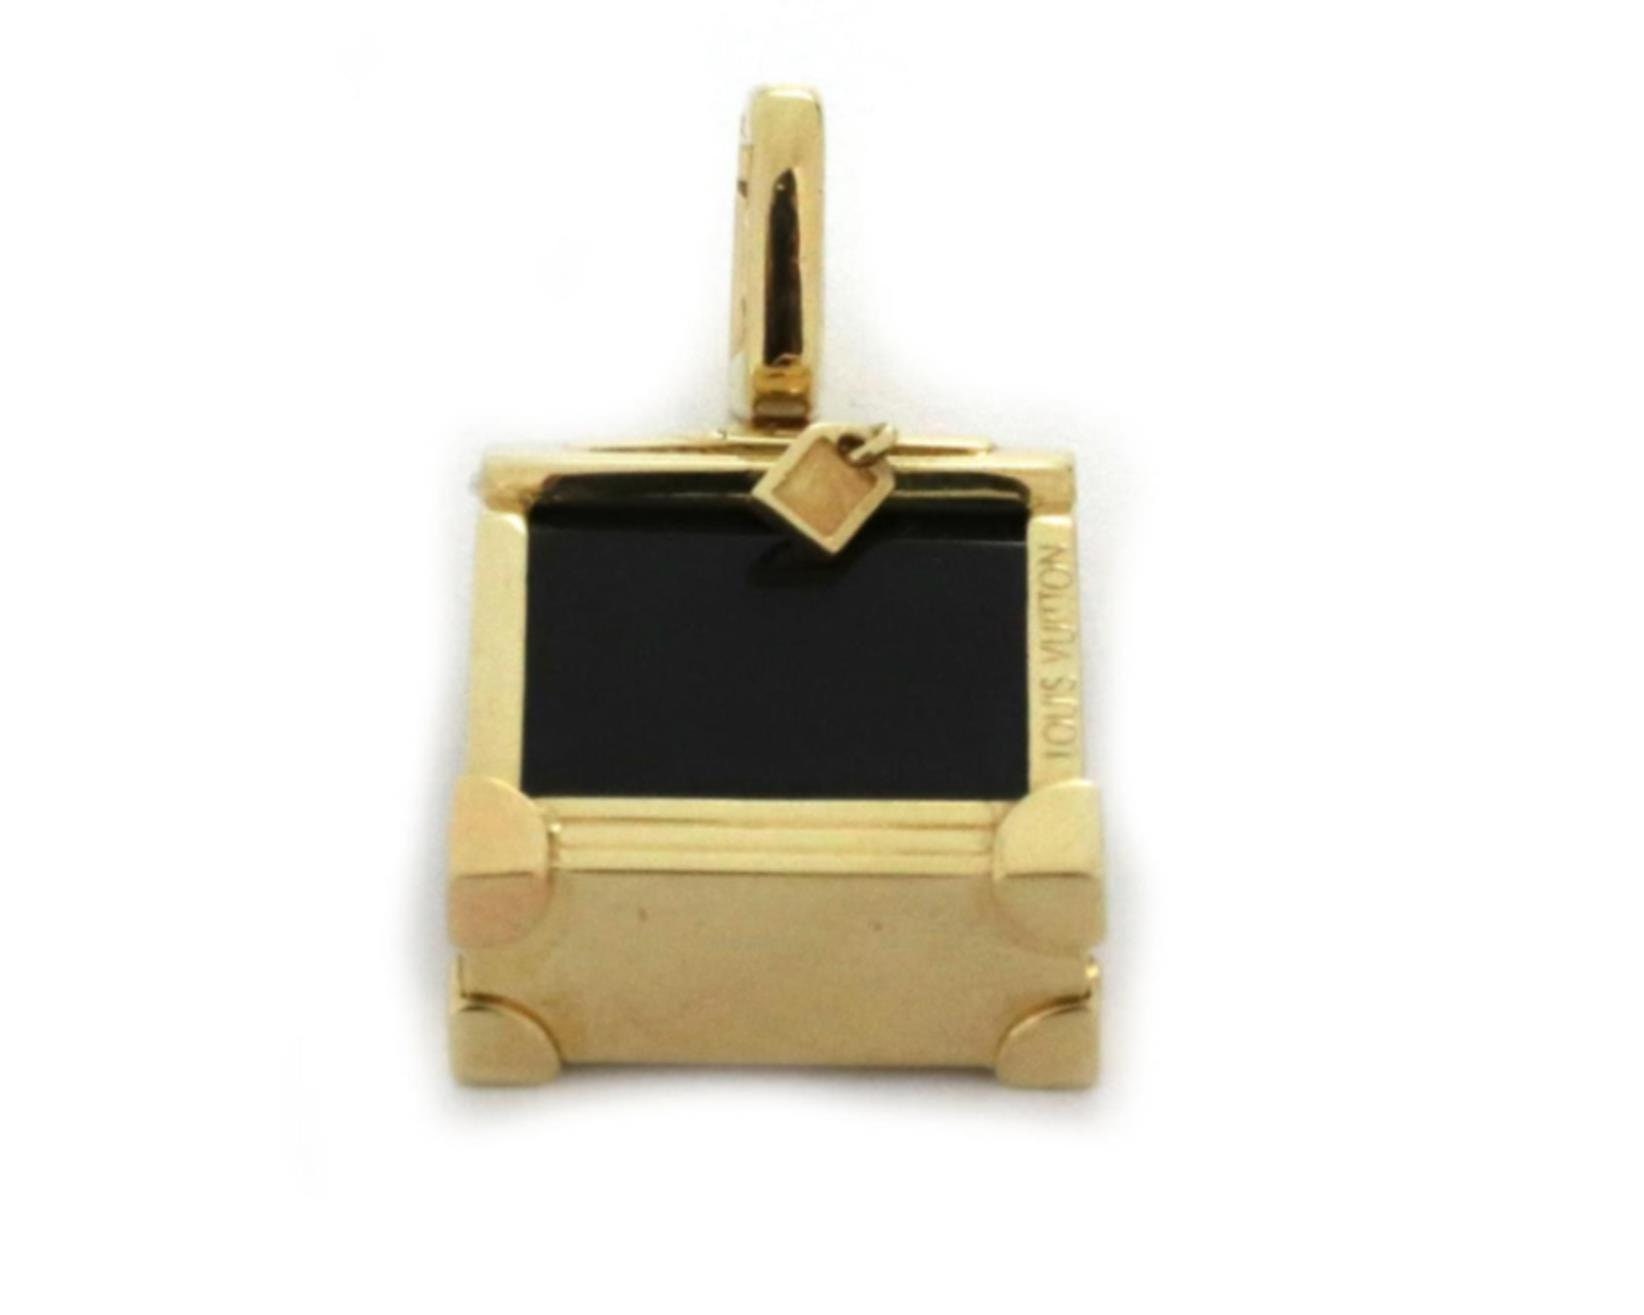 Louis Vuitton Gold And Onyx Steamer Bag Charm Pendant Available For  Immediate Sale At Sotheby's